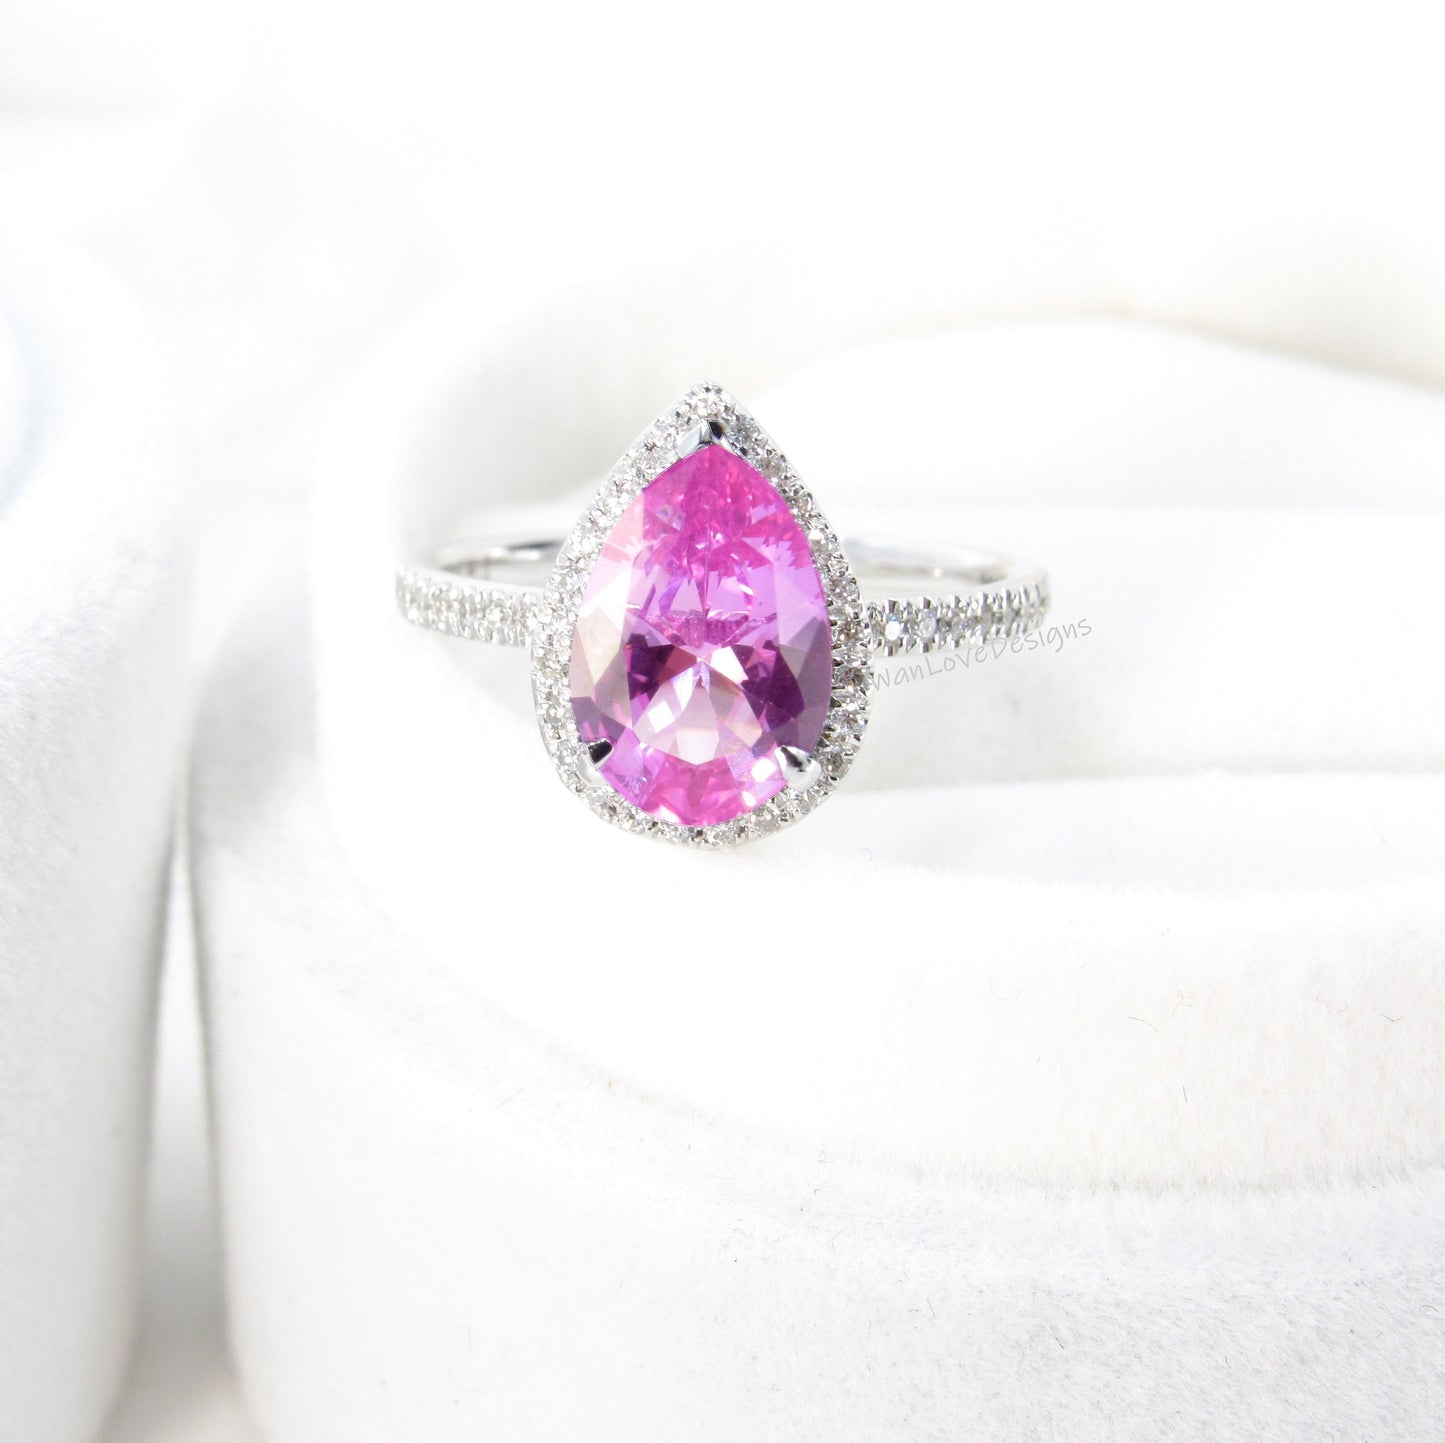 Vintage Pear shaped Pink Sapphire Engagement Ring, Pear Cut 14k Rose Gold Diamond Halo Ring, Wedding Ring Anniversary Ring Proposal Ring.